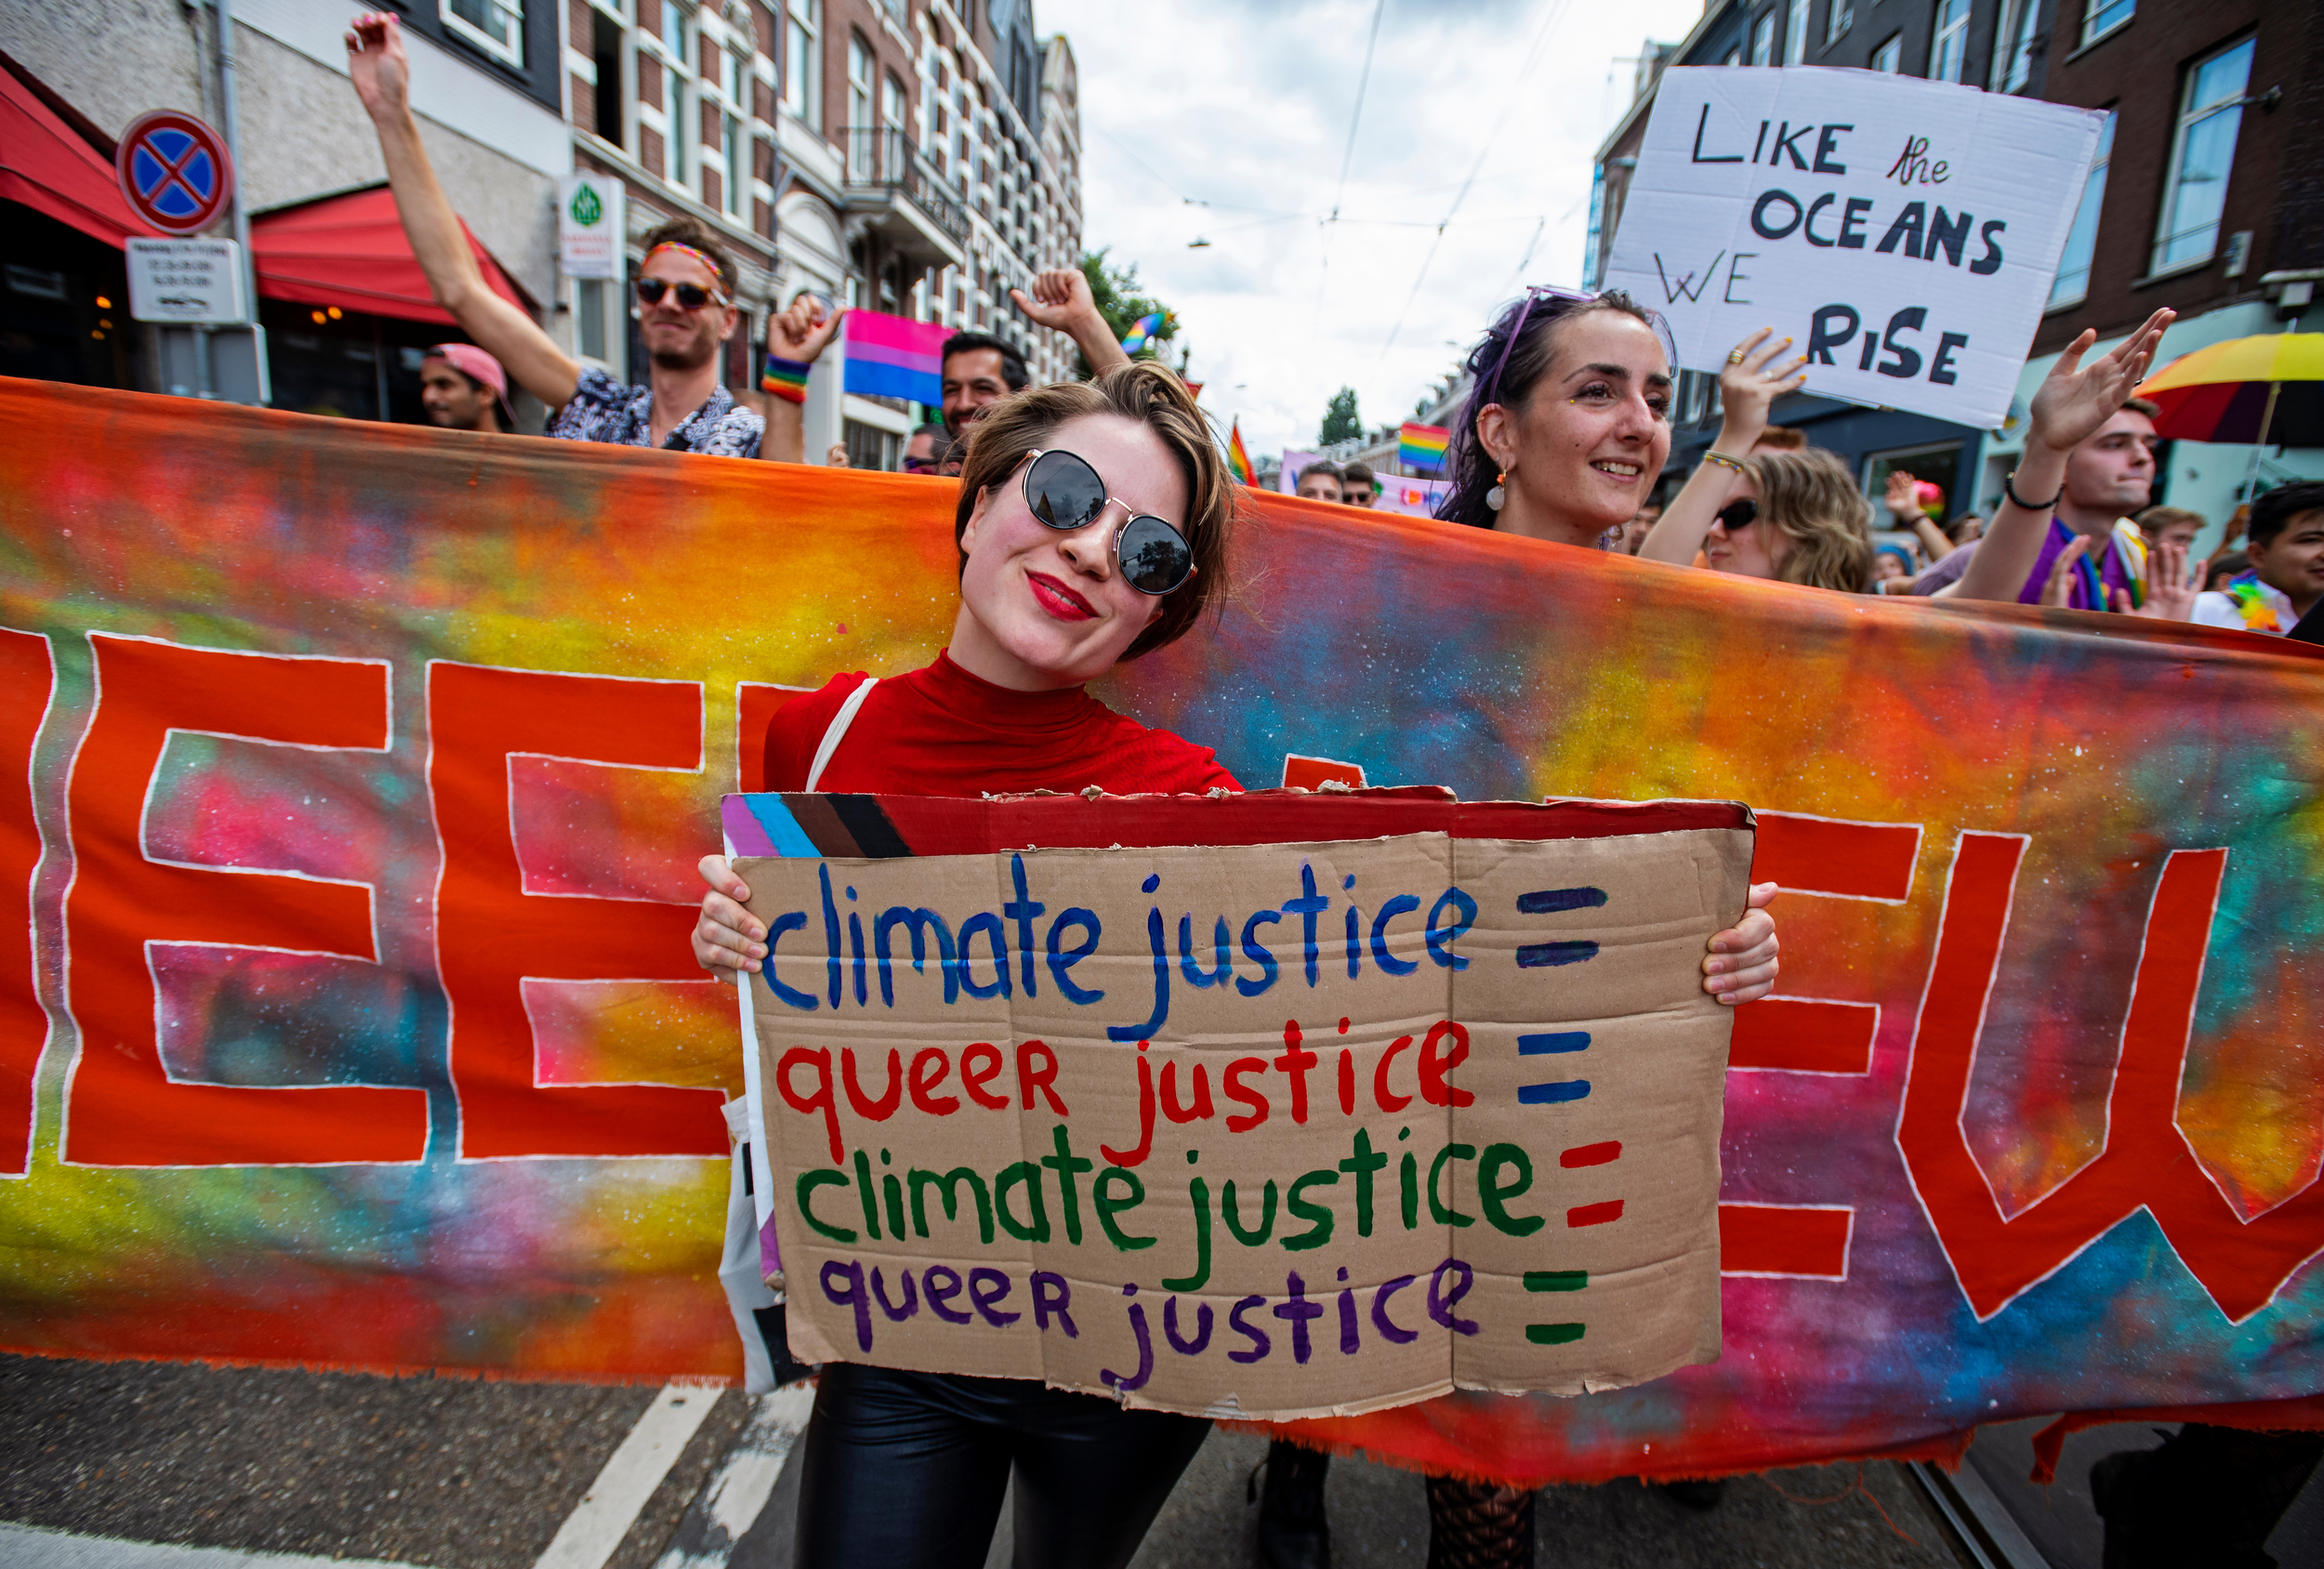 Person at a pride march holds a sign saying 'Climate justice = queer justice'